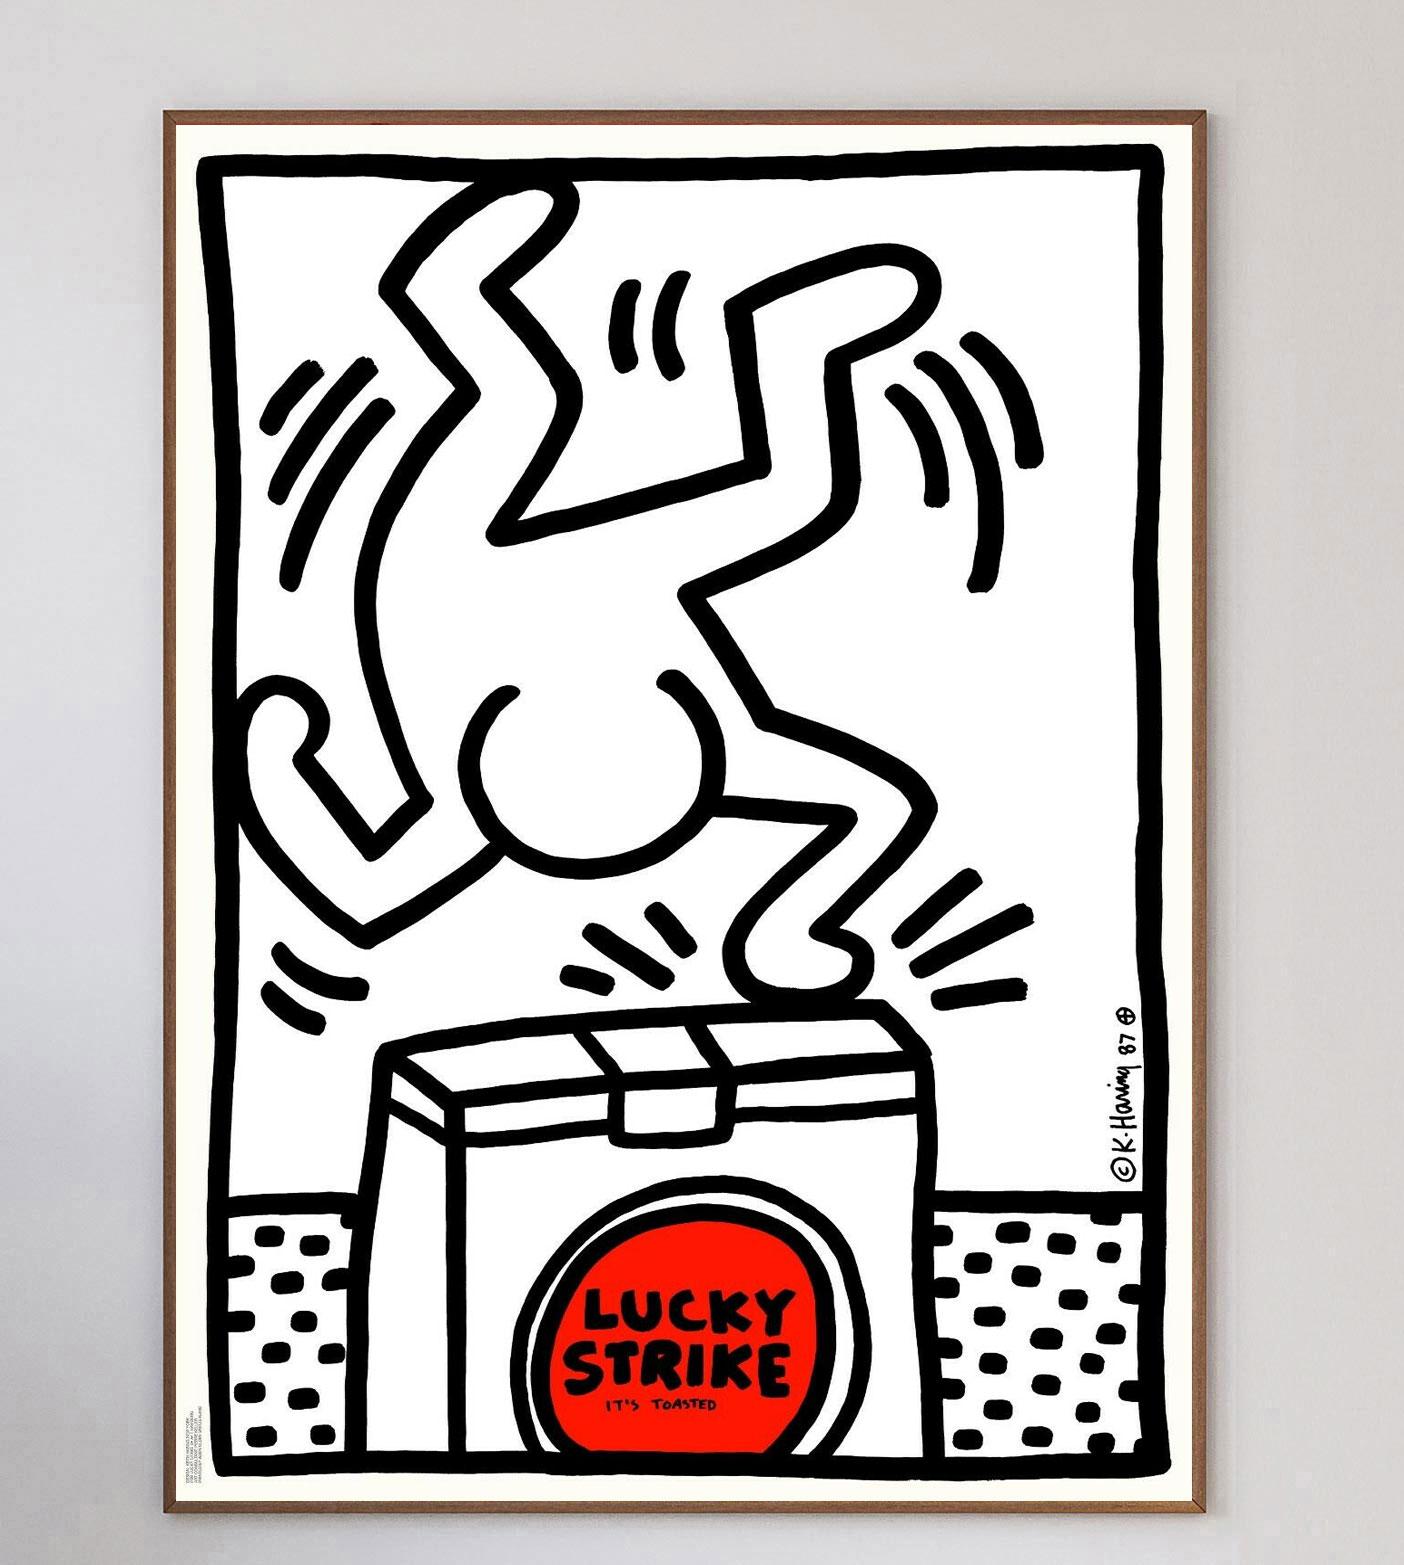 Cigarette brand Lucky Strike commissioned Keith Haring to design a series of posters & advertisements for them in 1987. In turn, Haring submitted 10 pieces in his trademark and unique style, 9 of which were accepted. The 10th piece, Haring wrote in